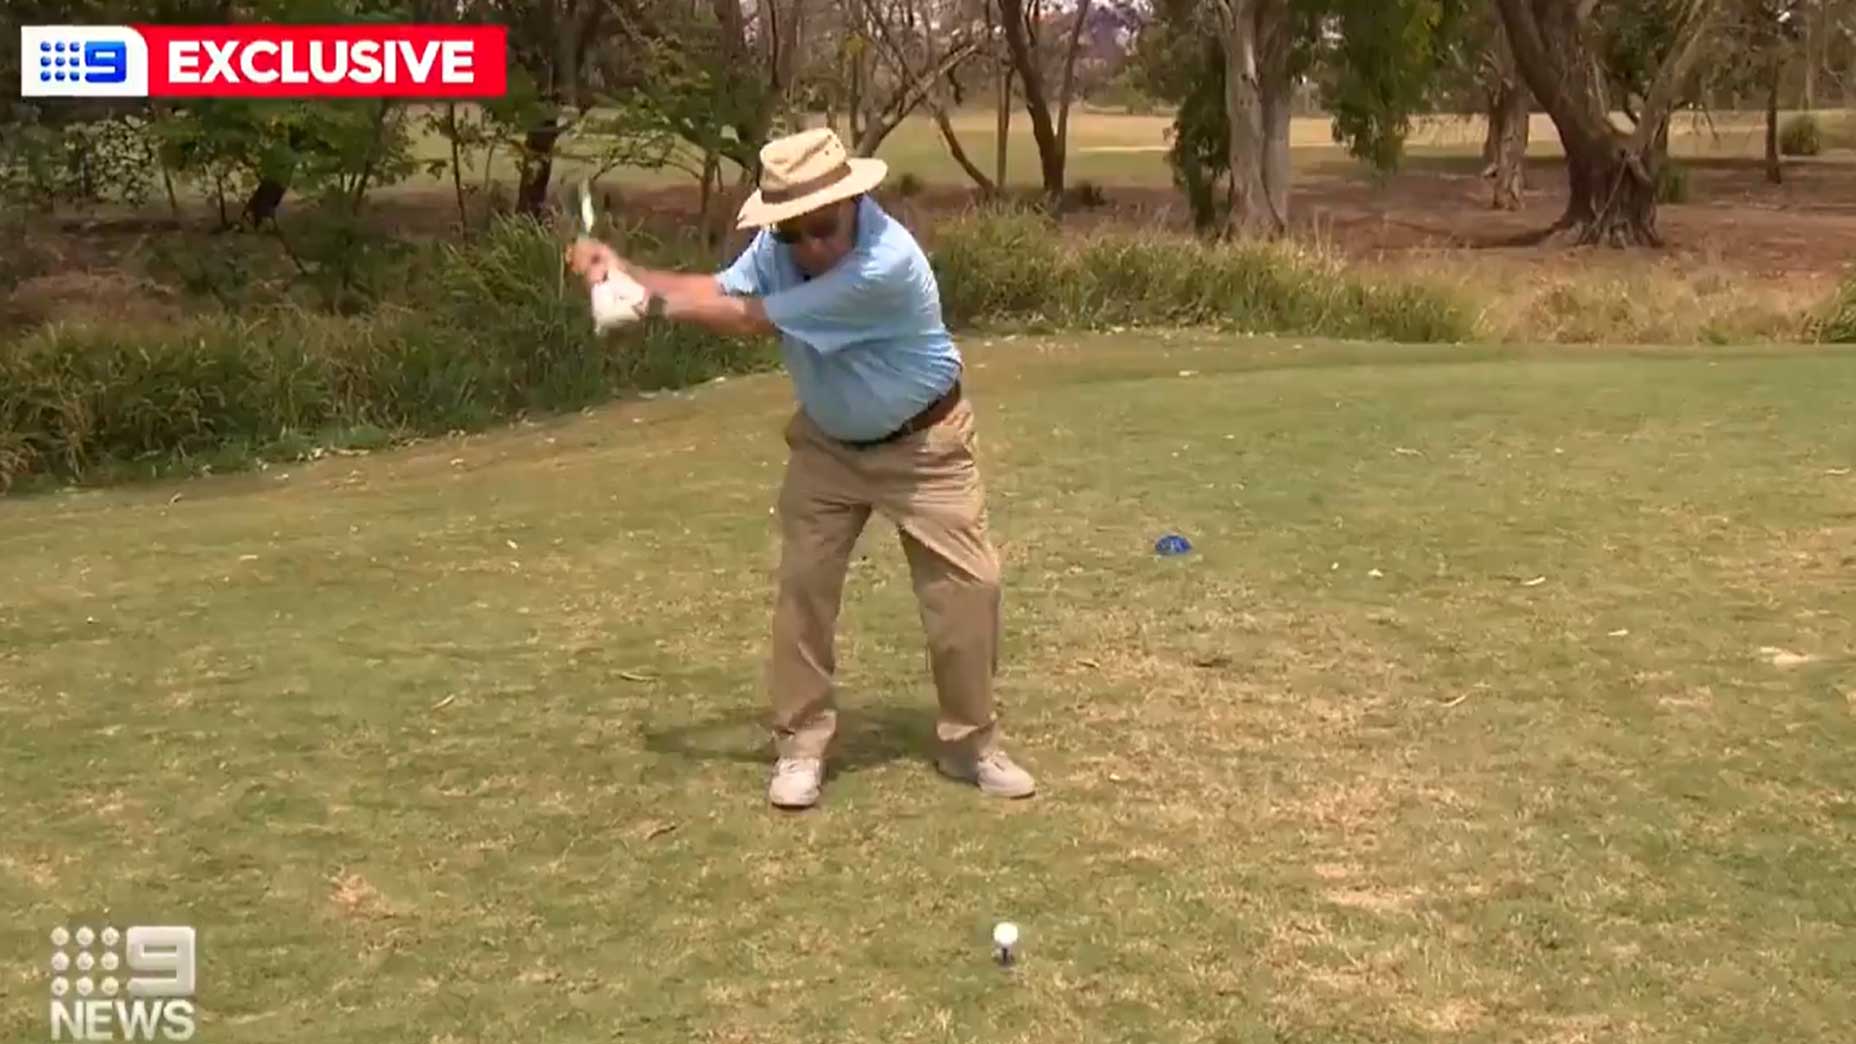 Australian golfer records incredible ace after hitting into group ahead